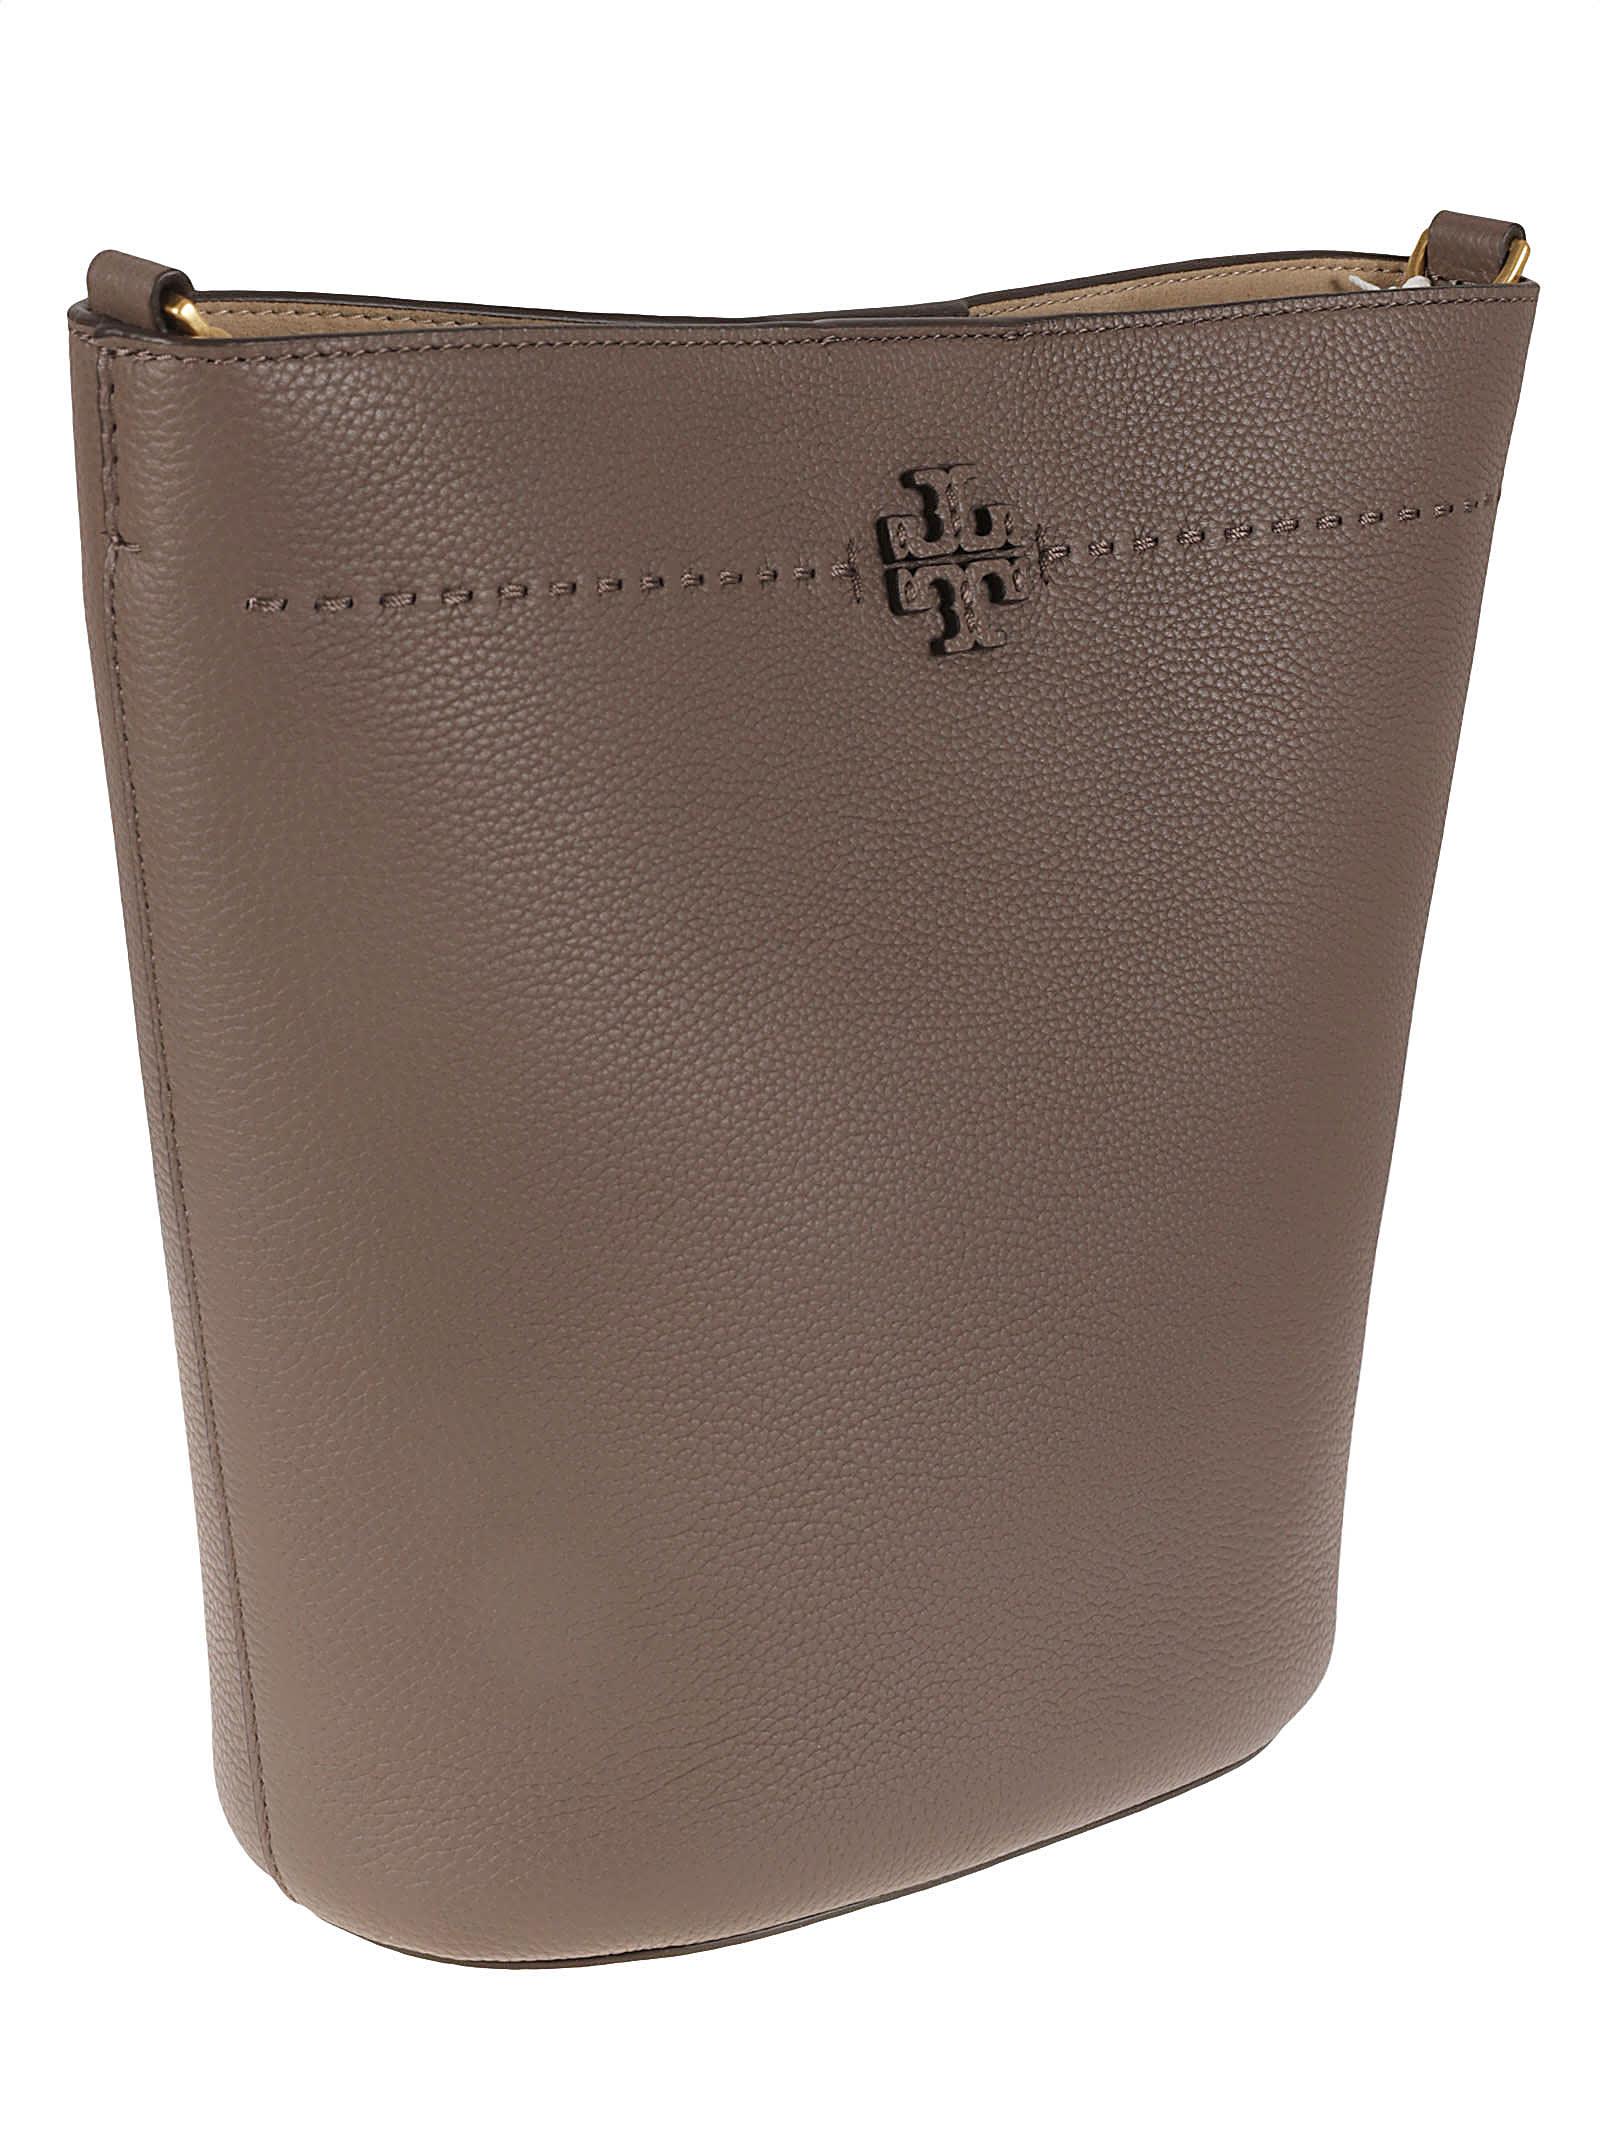 Tory Burch Mcgraw Leather Bucket Bag - Brown